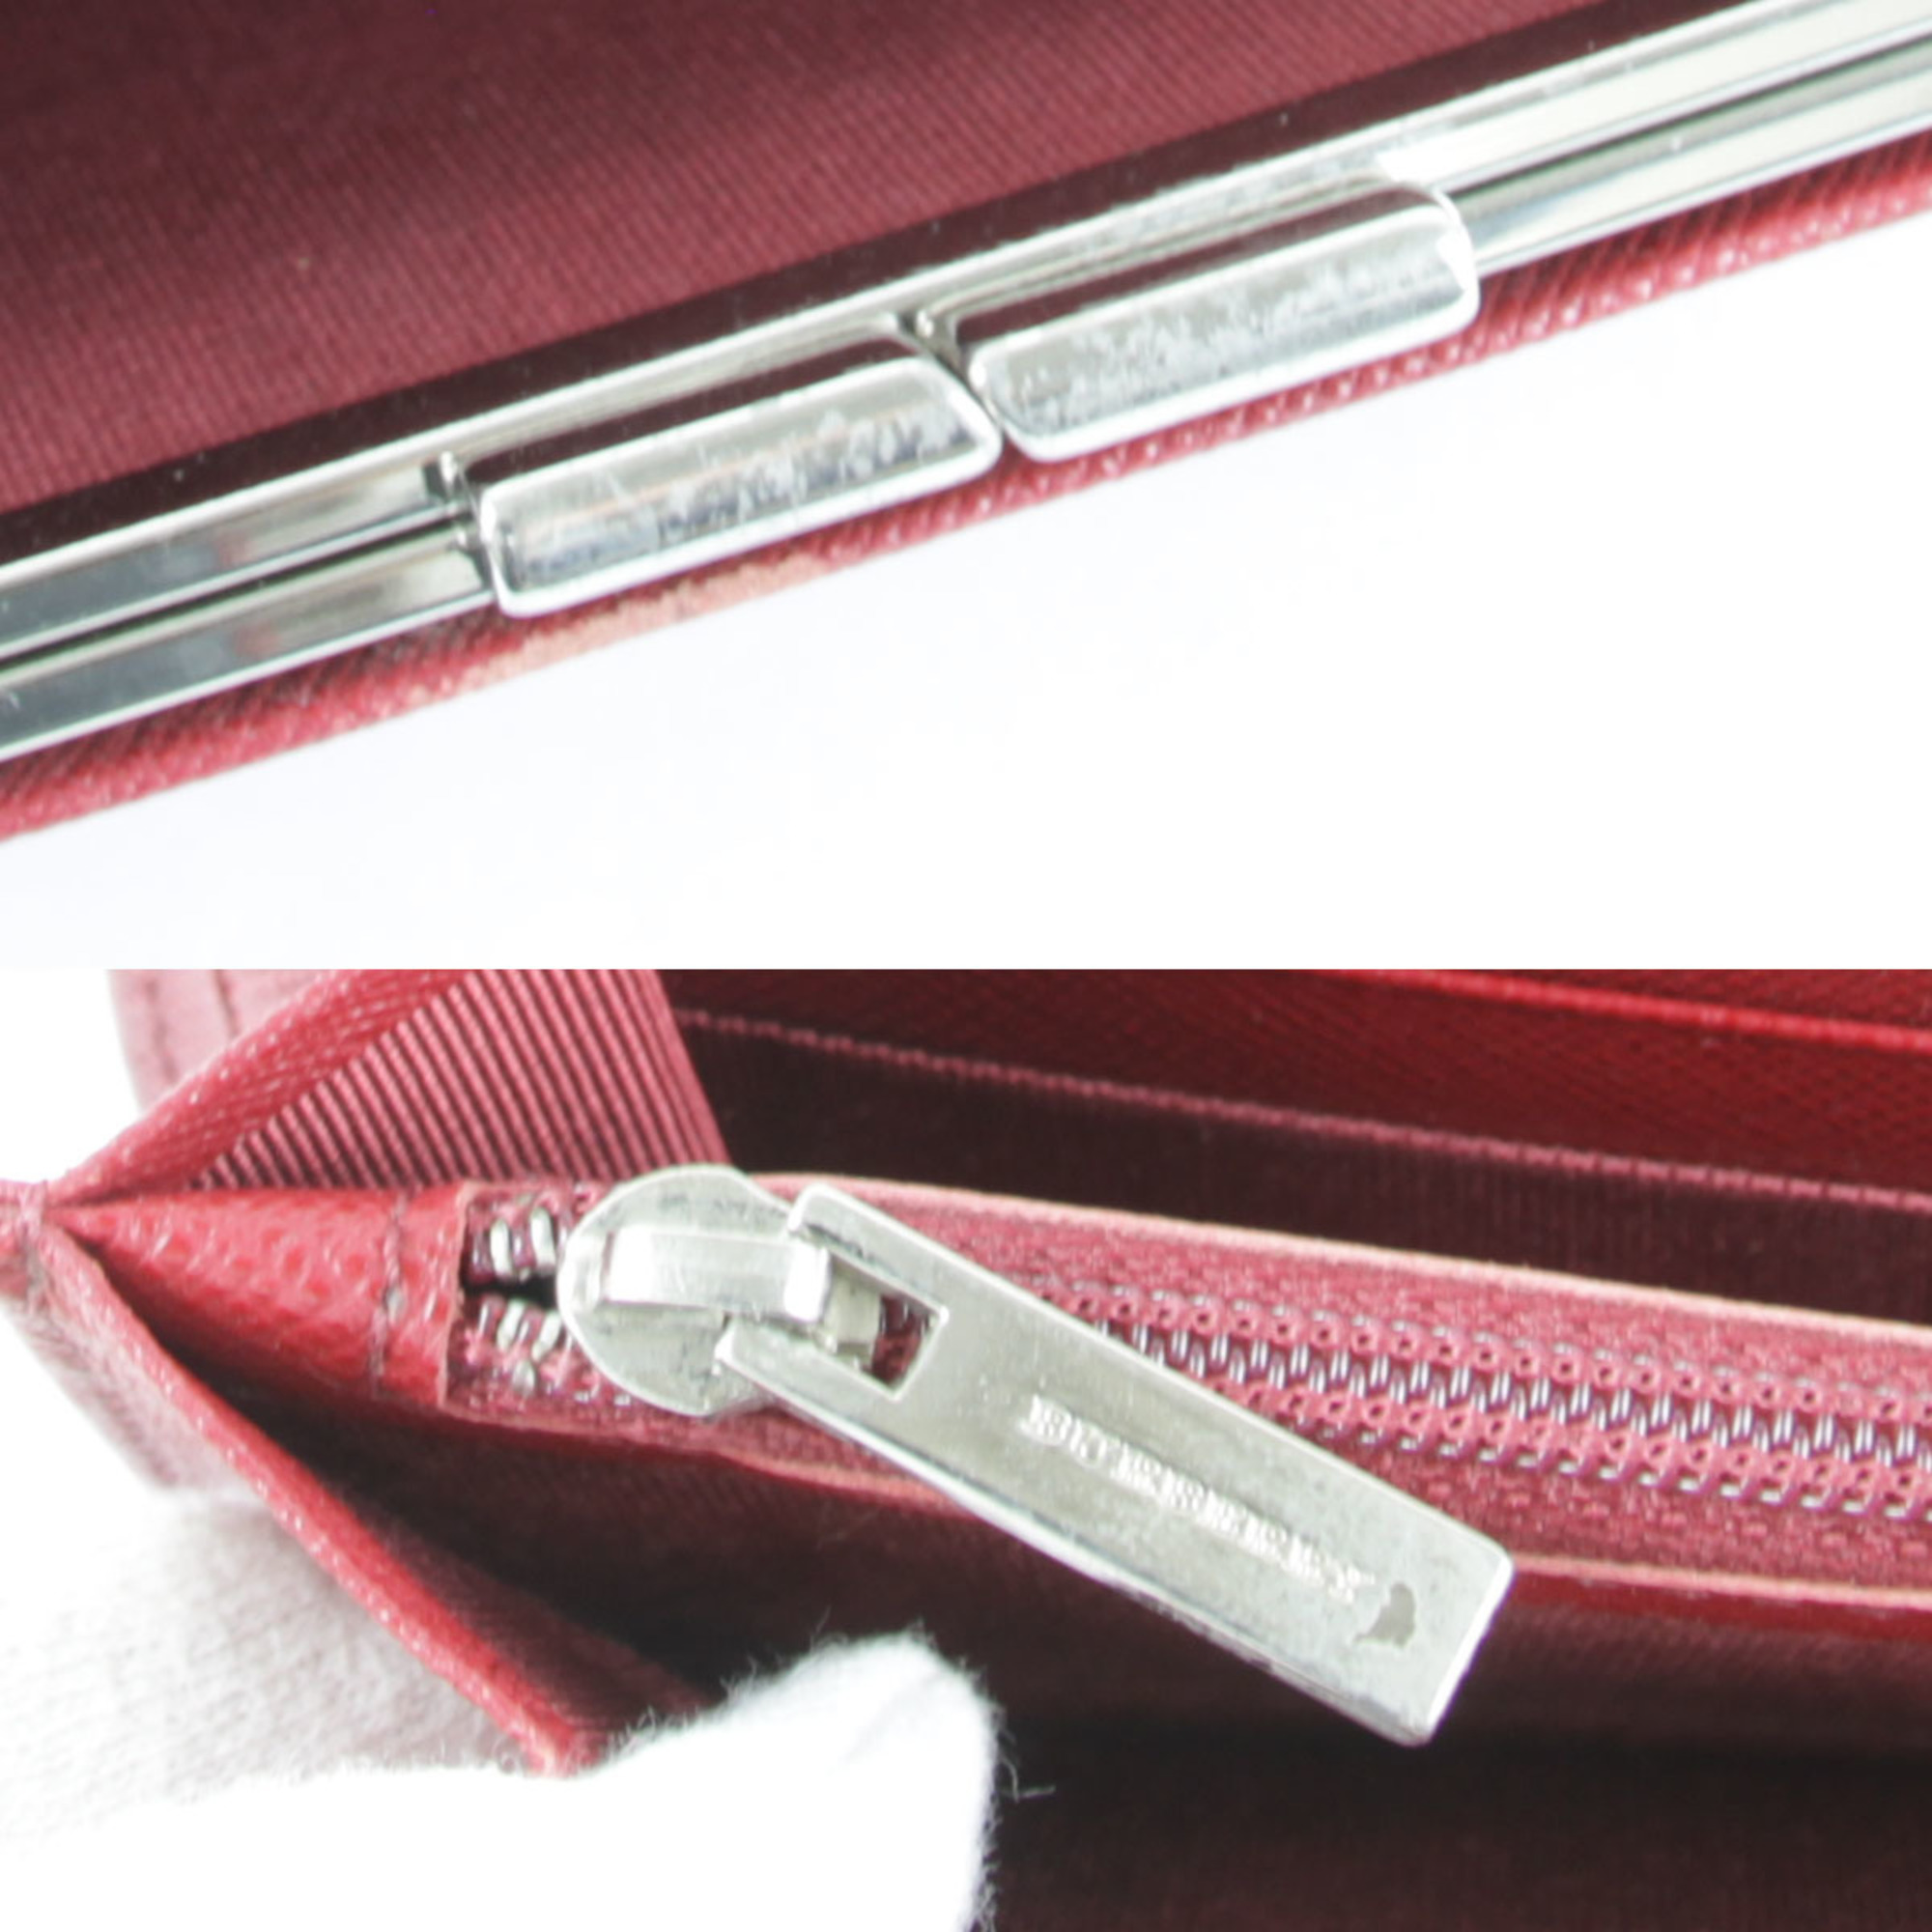 BURBERRY Burberry long wallet leather wine red ladies